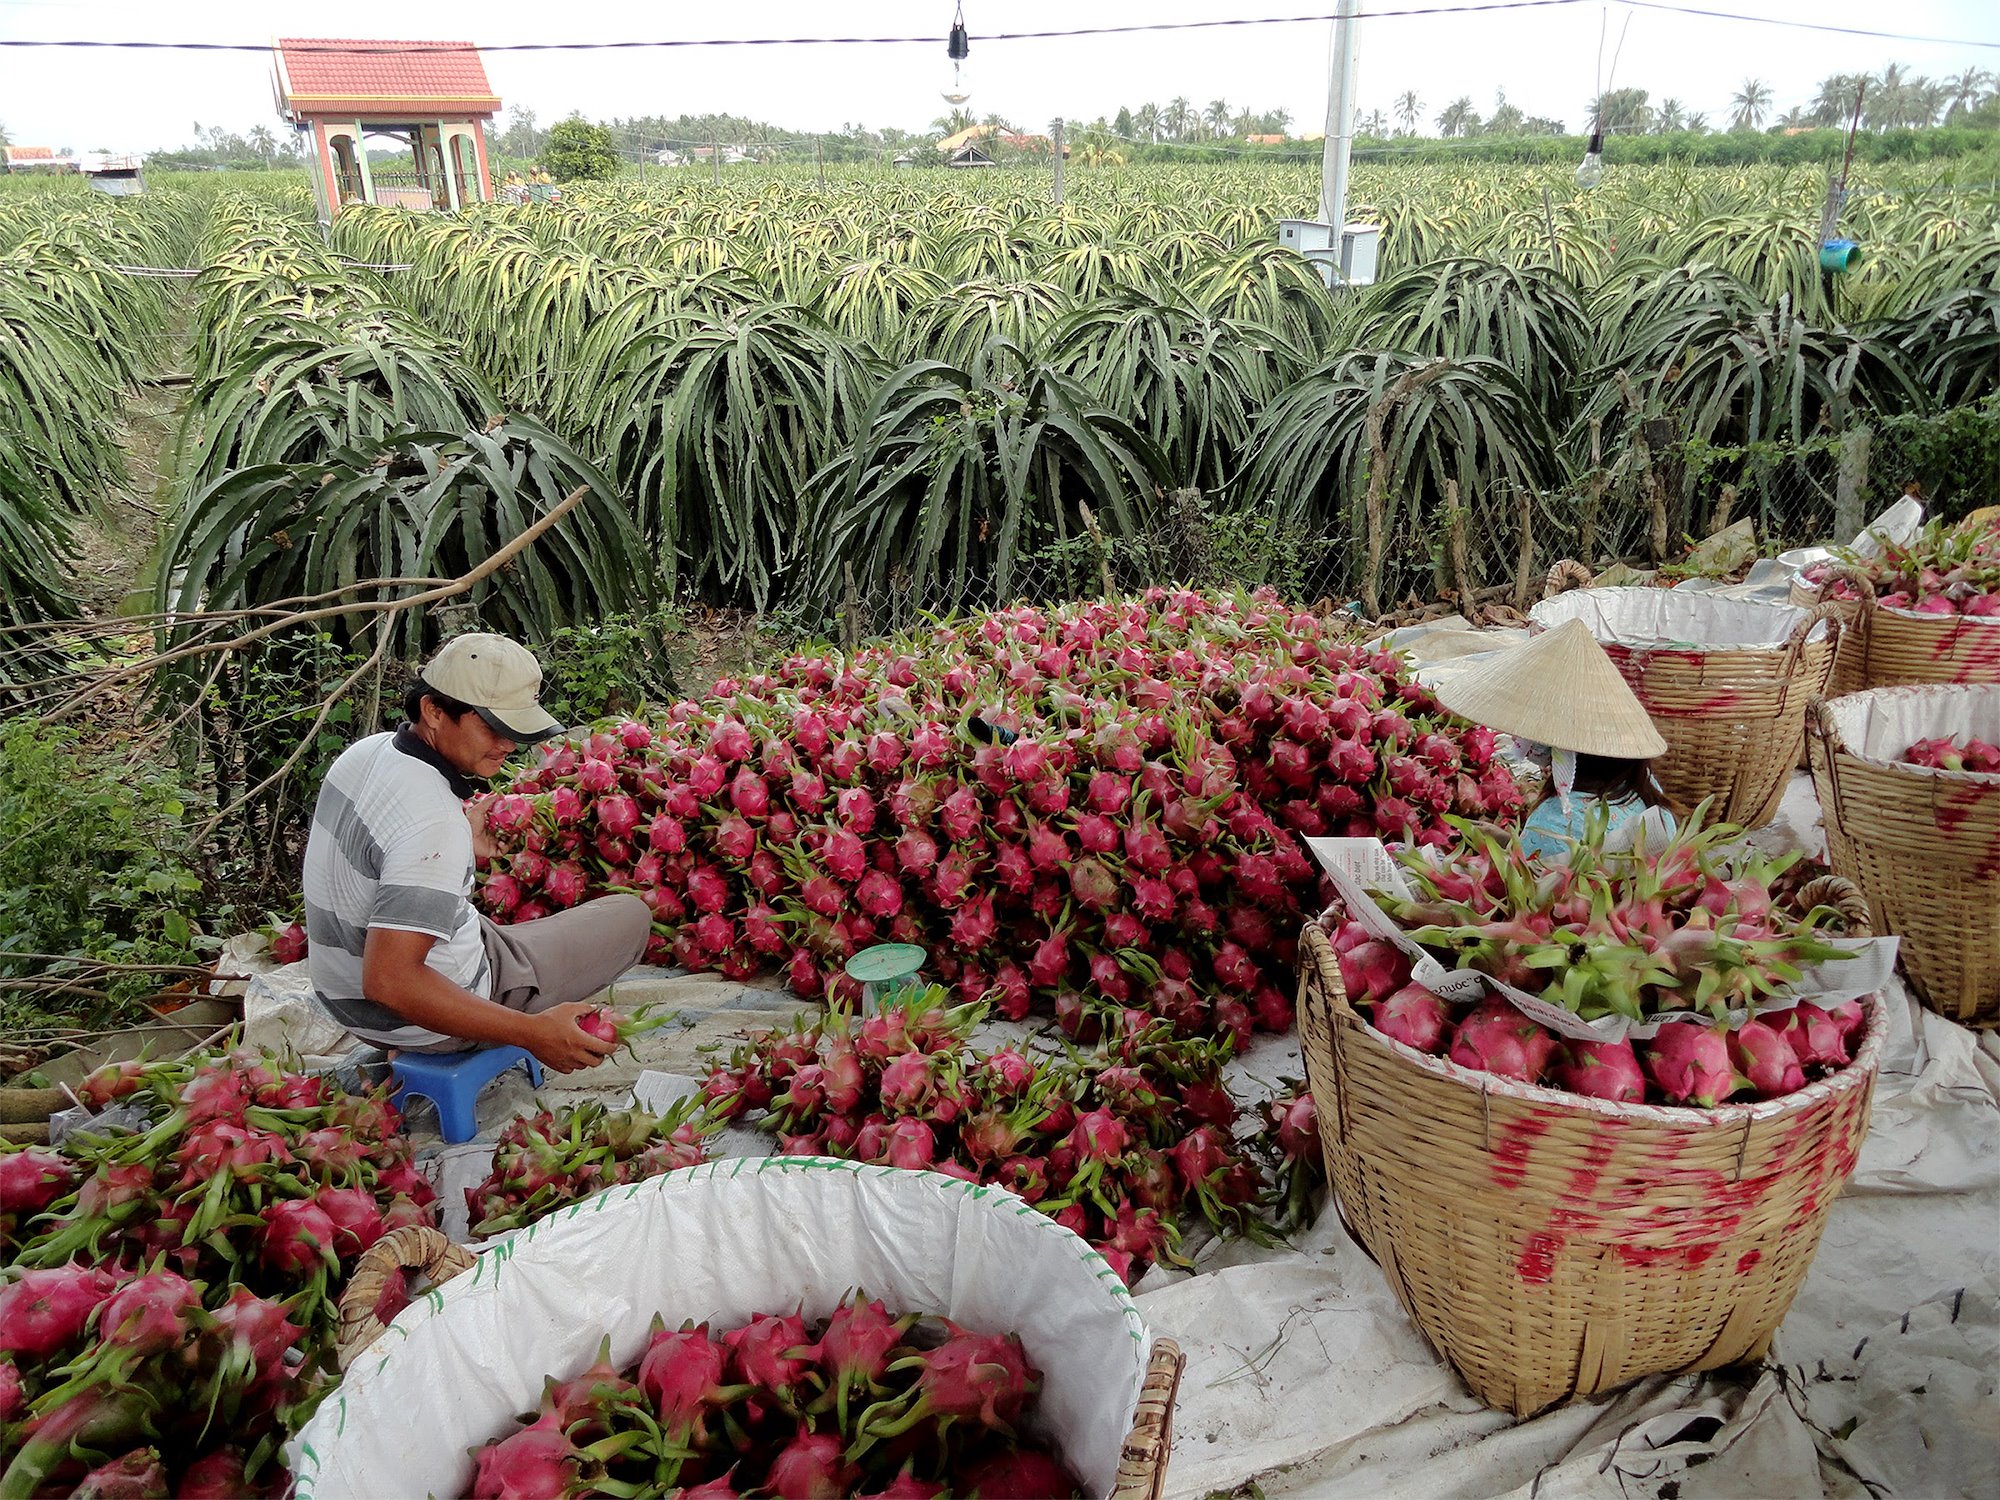 Man with large piles of dragon fruit